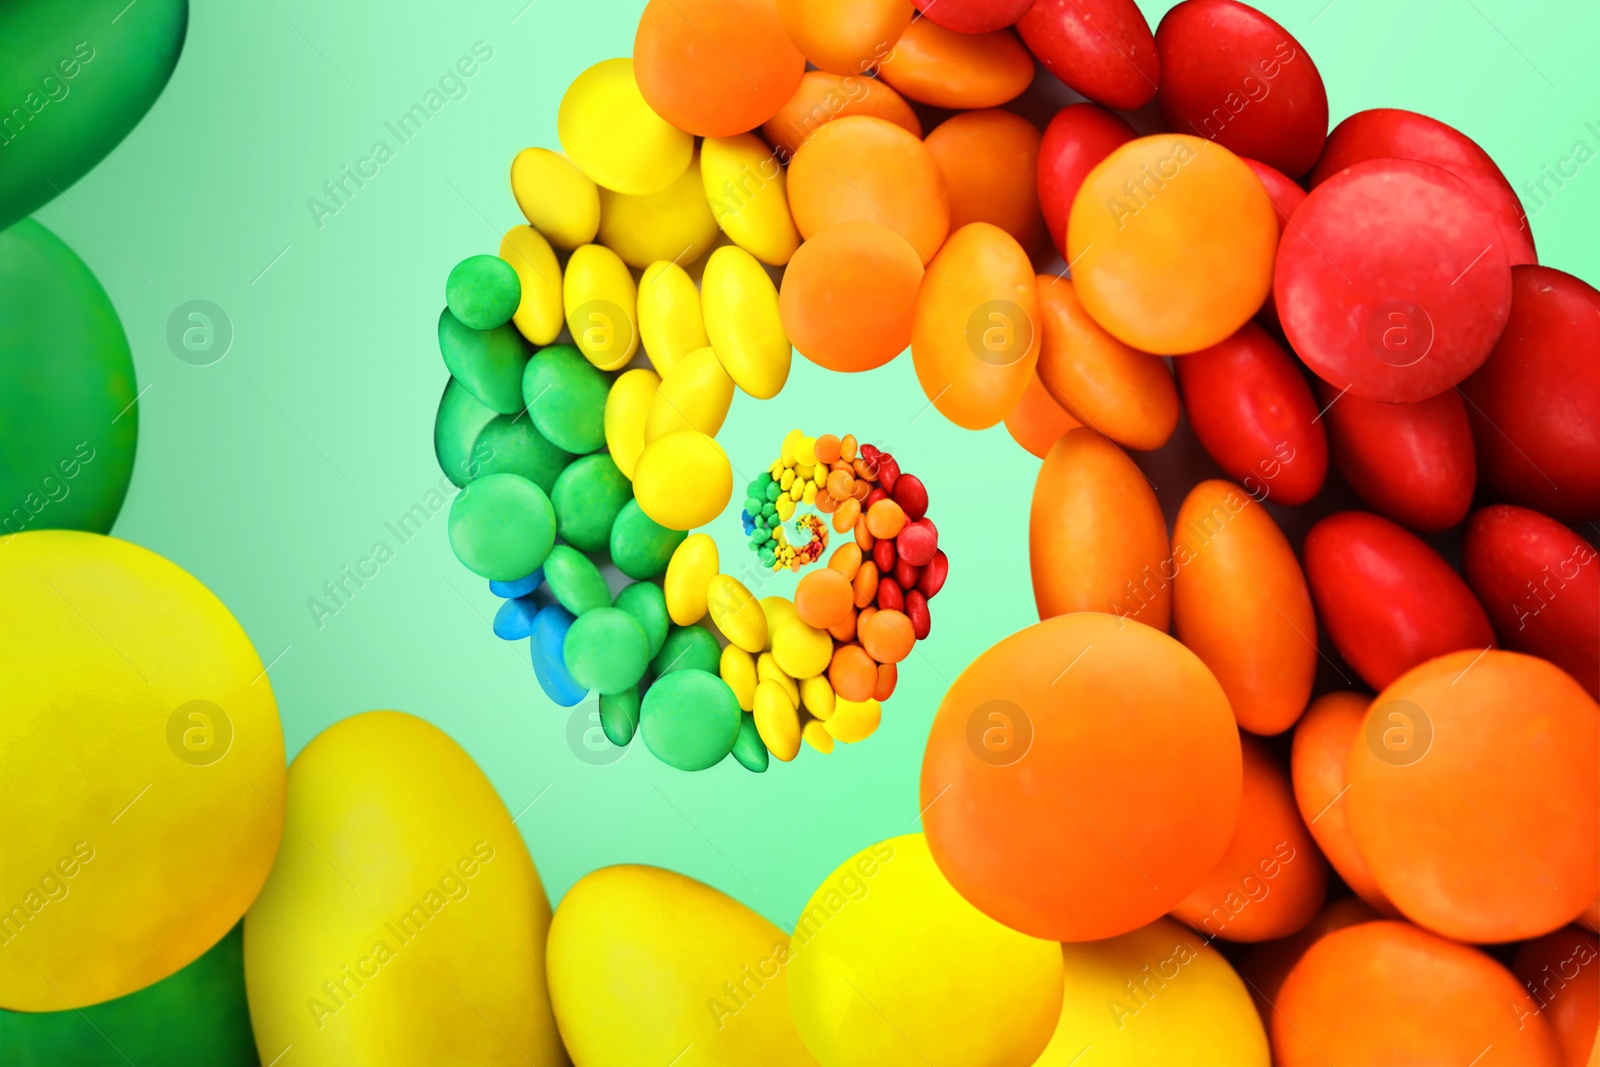 Image of Whirl of colorful candies on mint color background